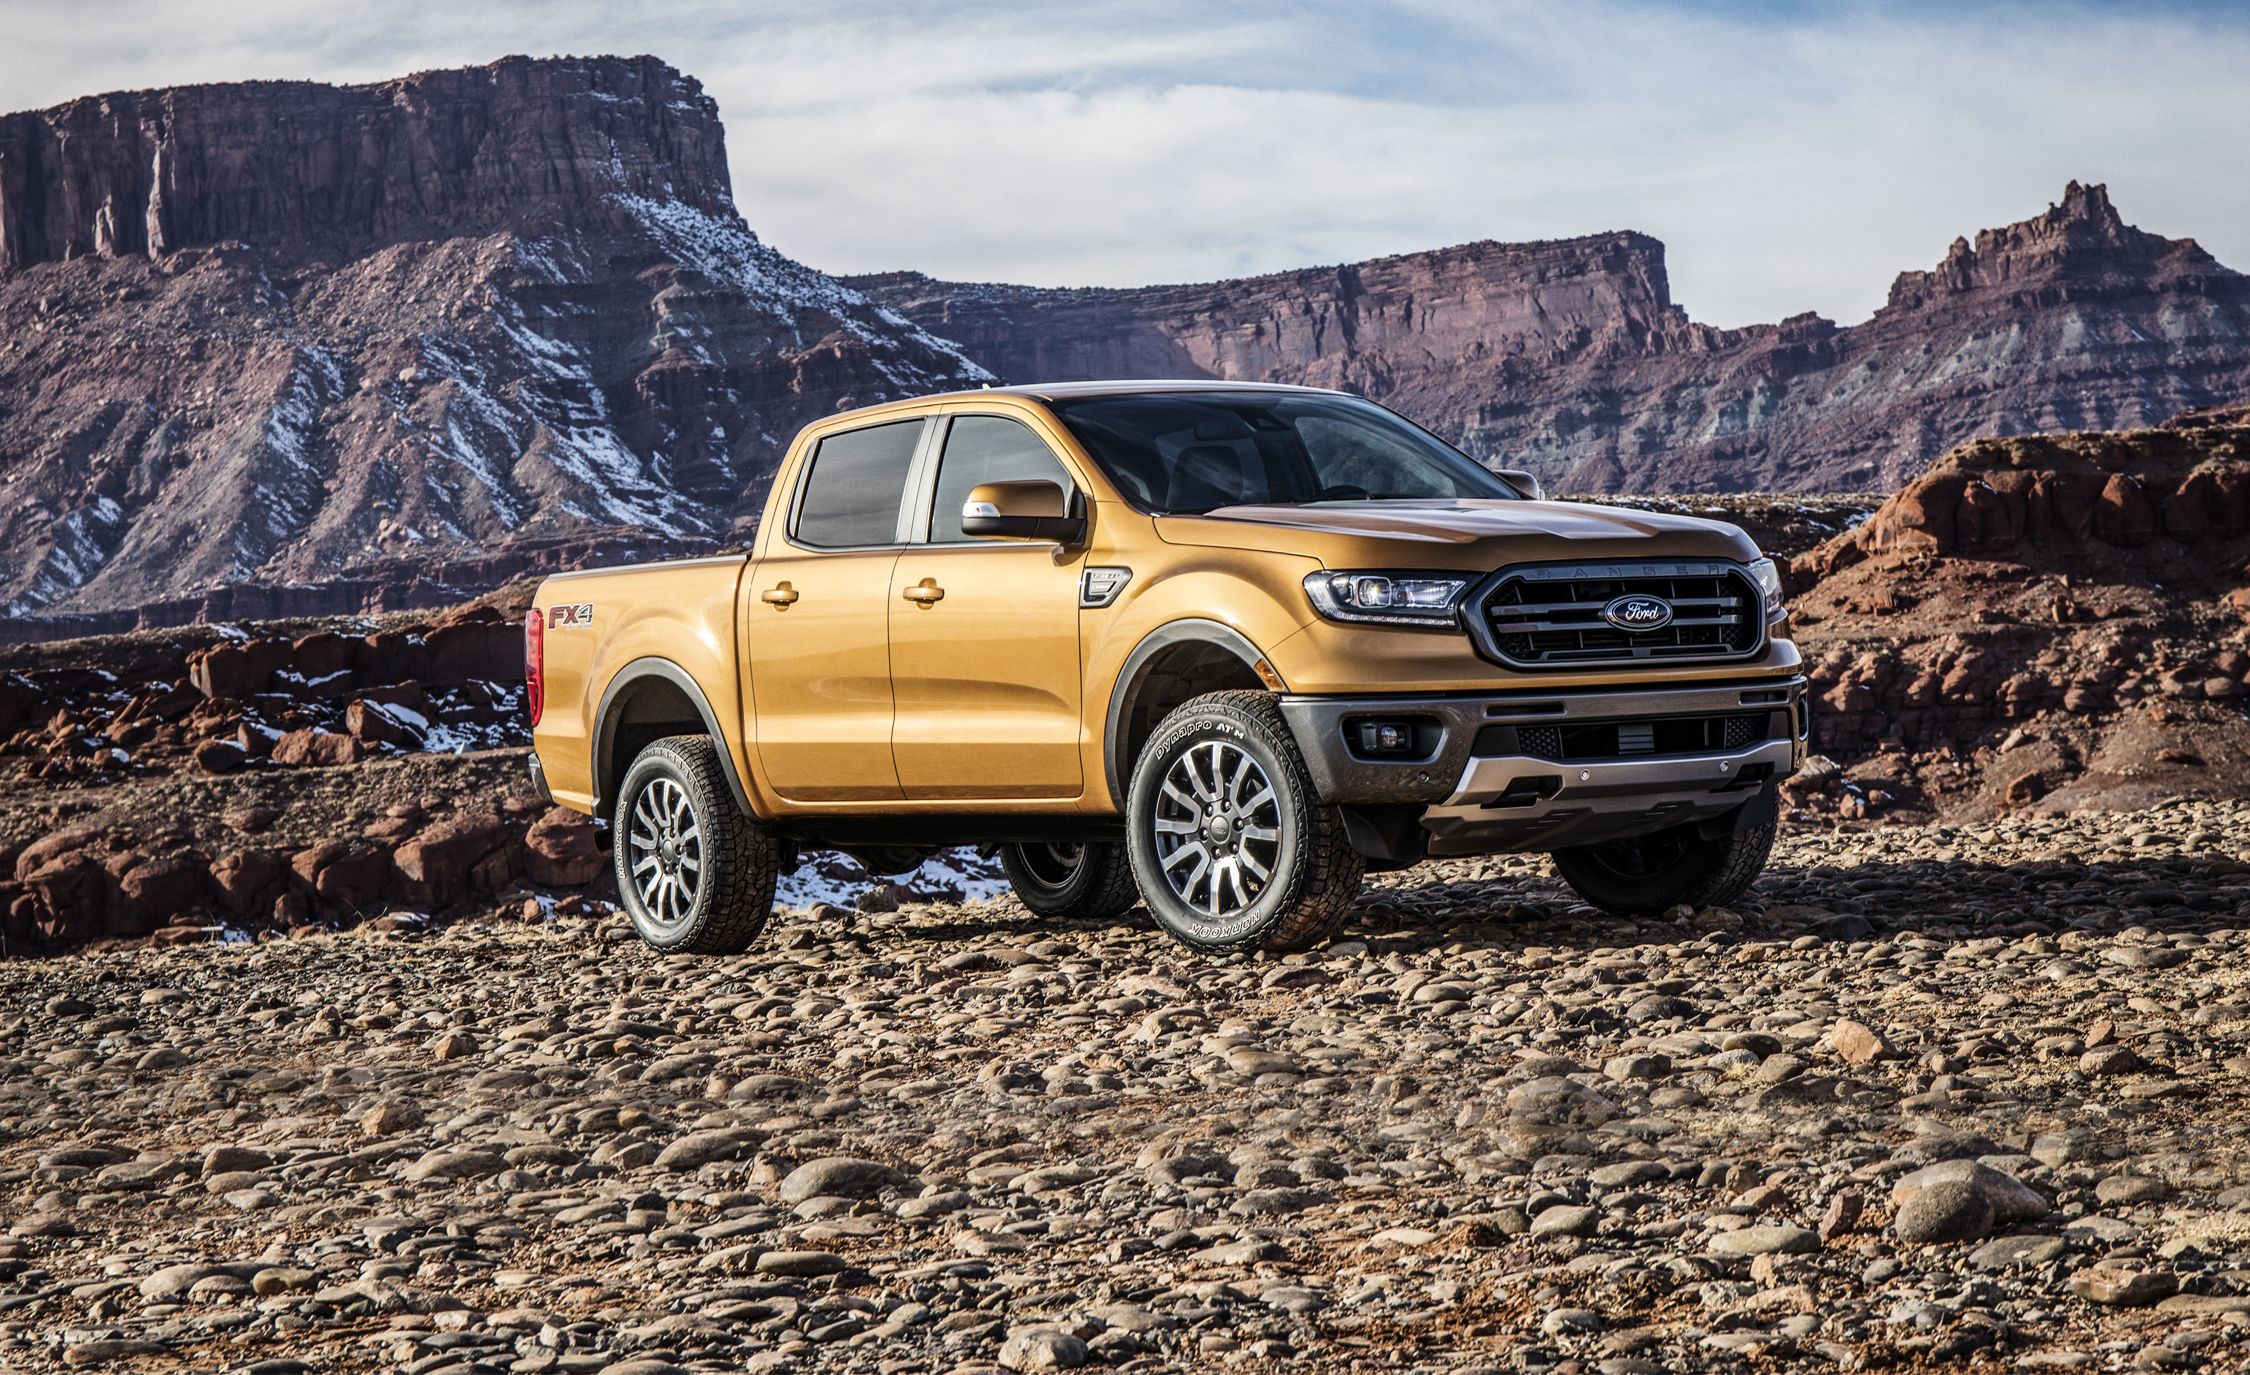 2019 Ford Ranger Facts Updates You Need to Know